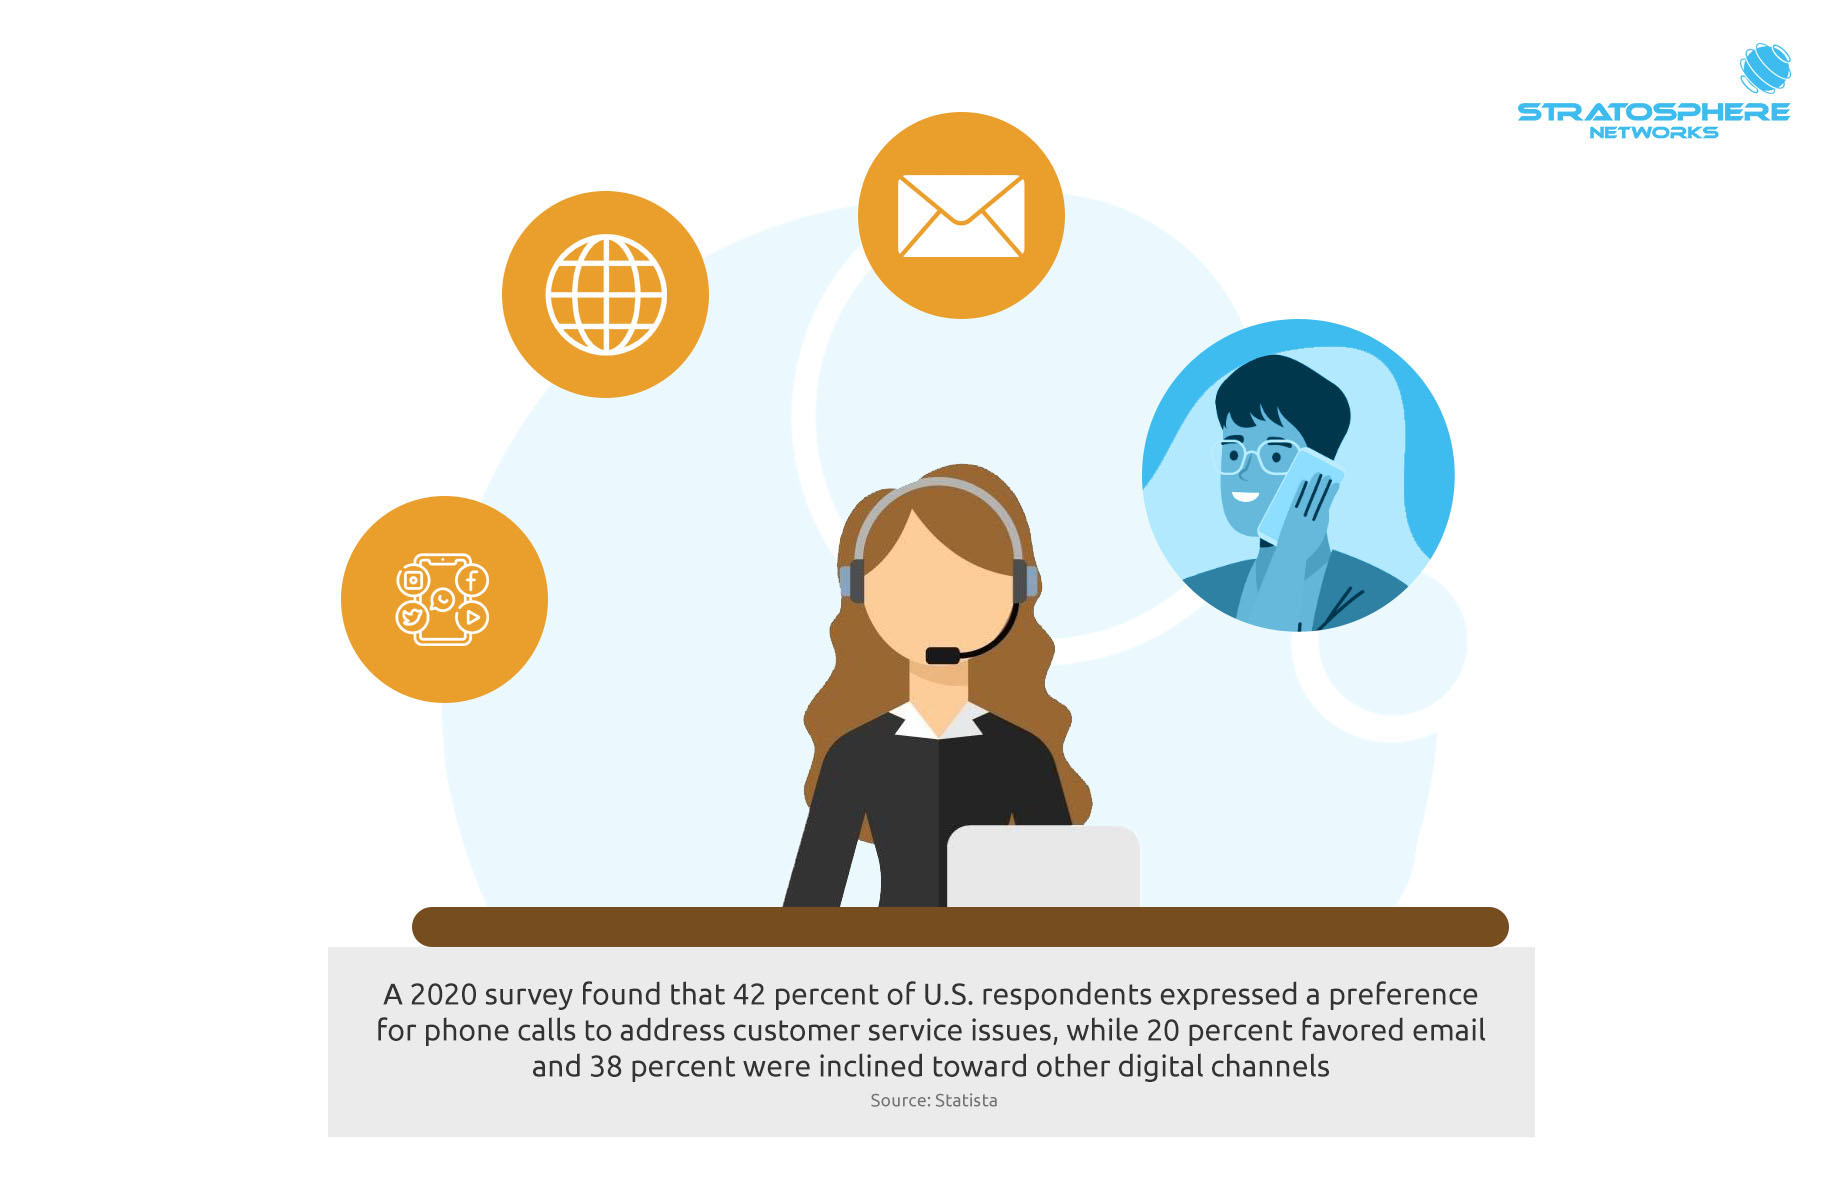 An illustration of a call center agent with a headset and icons representing email, web chat, social media, and voice floating over her head. Text below the image states that a 2020 survey found that 42 percent of U.S. respondents expressed a preference for phone calls to address customer service issues, while 20 percent favored email and 38 percent were inclined toward other digital channels (Source: Statista). 